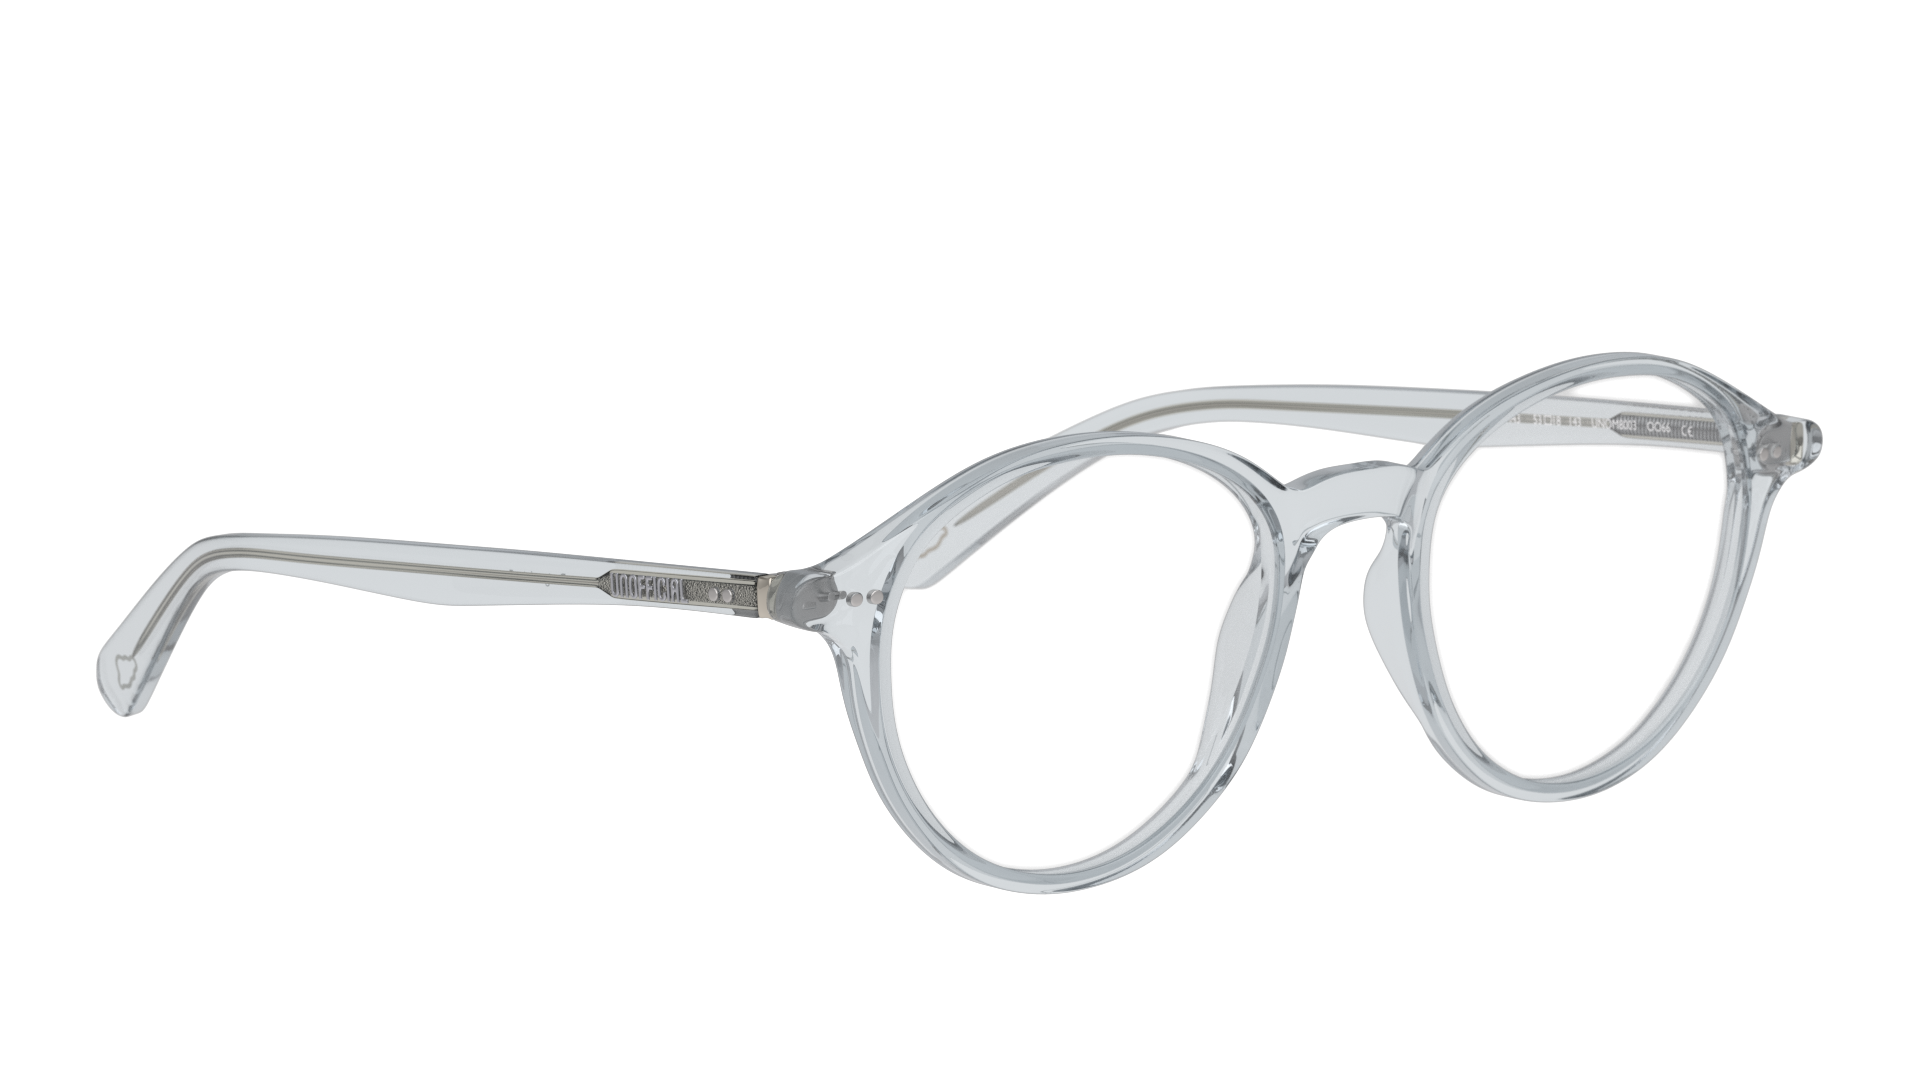 Angle_Right01 Unofficial UNOM0185 Glasses Transparent / Transparent, Grey